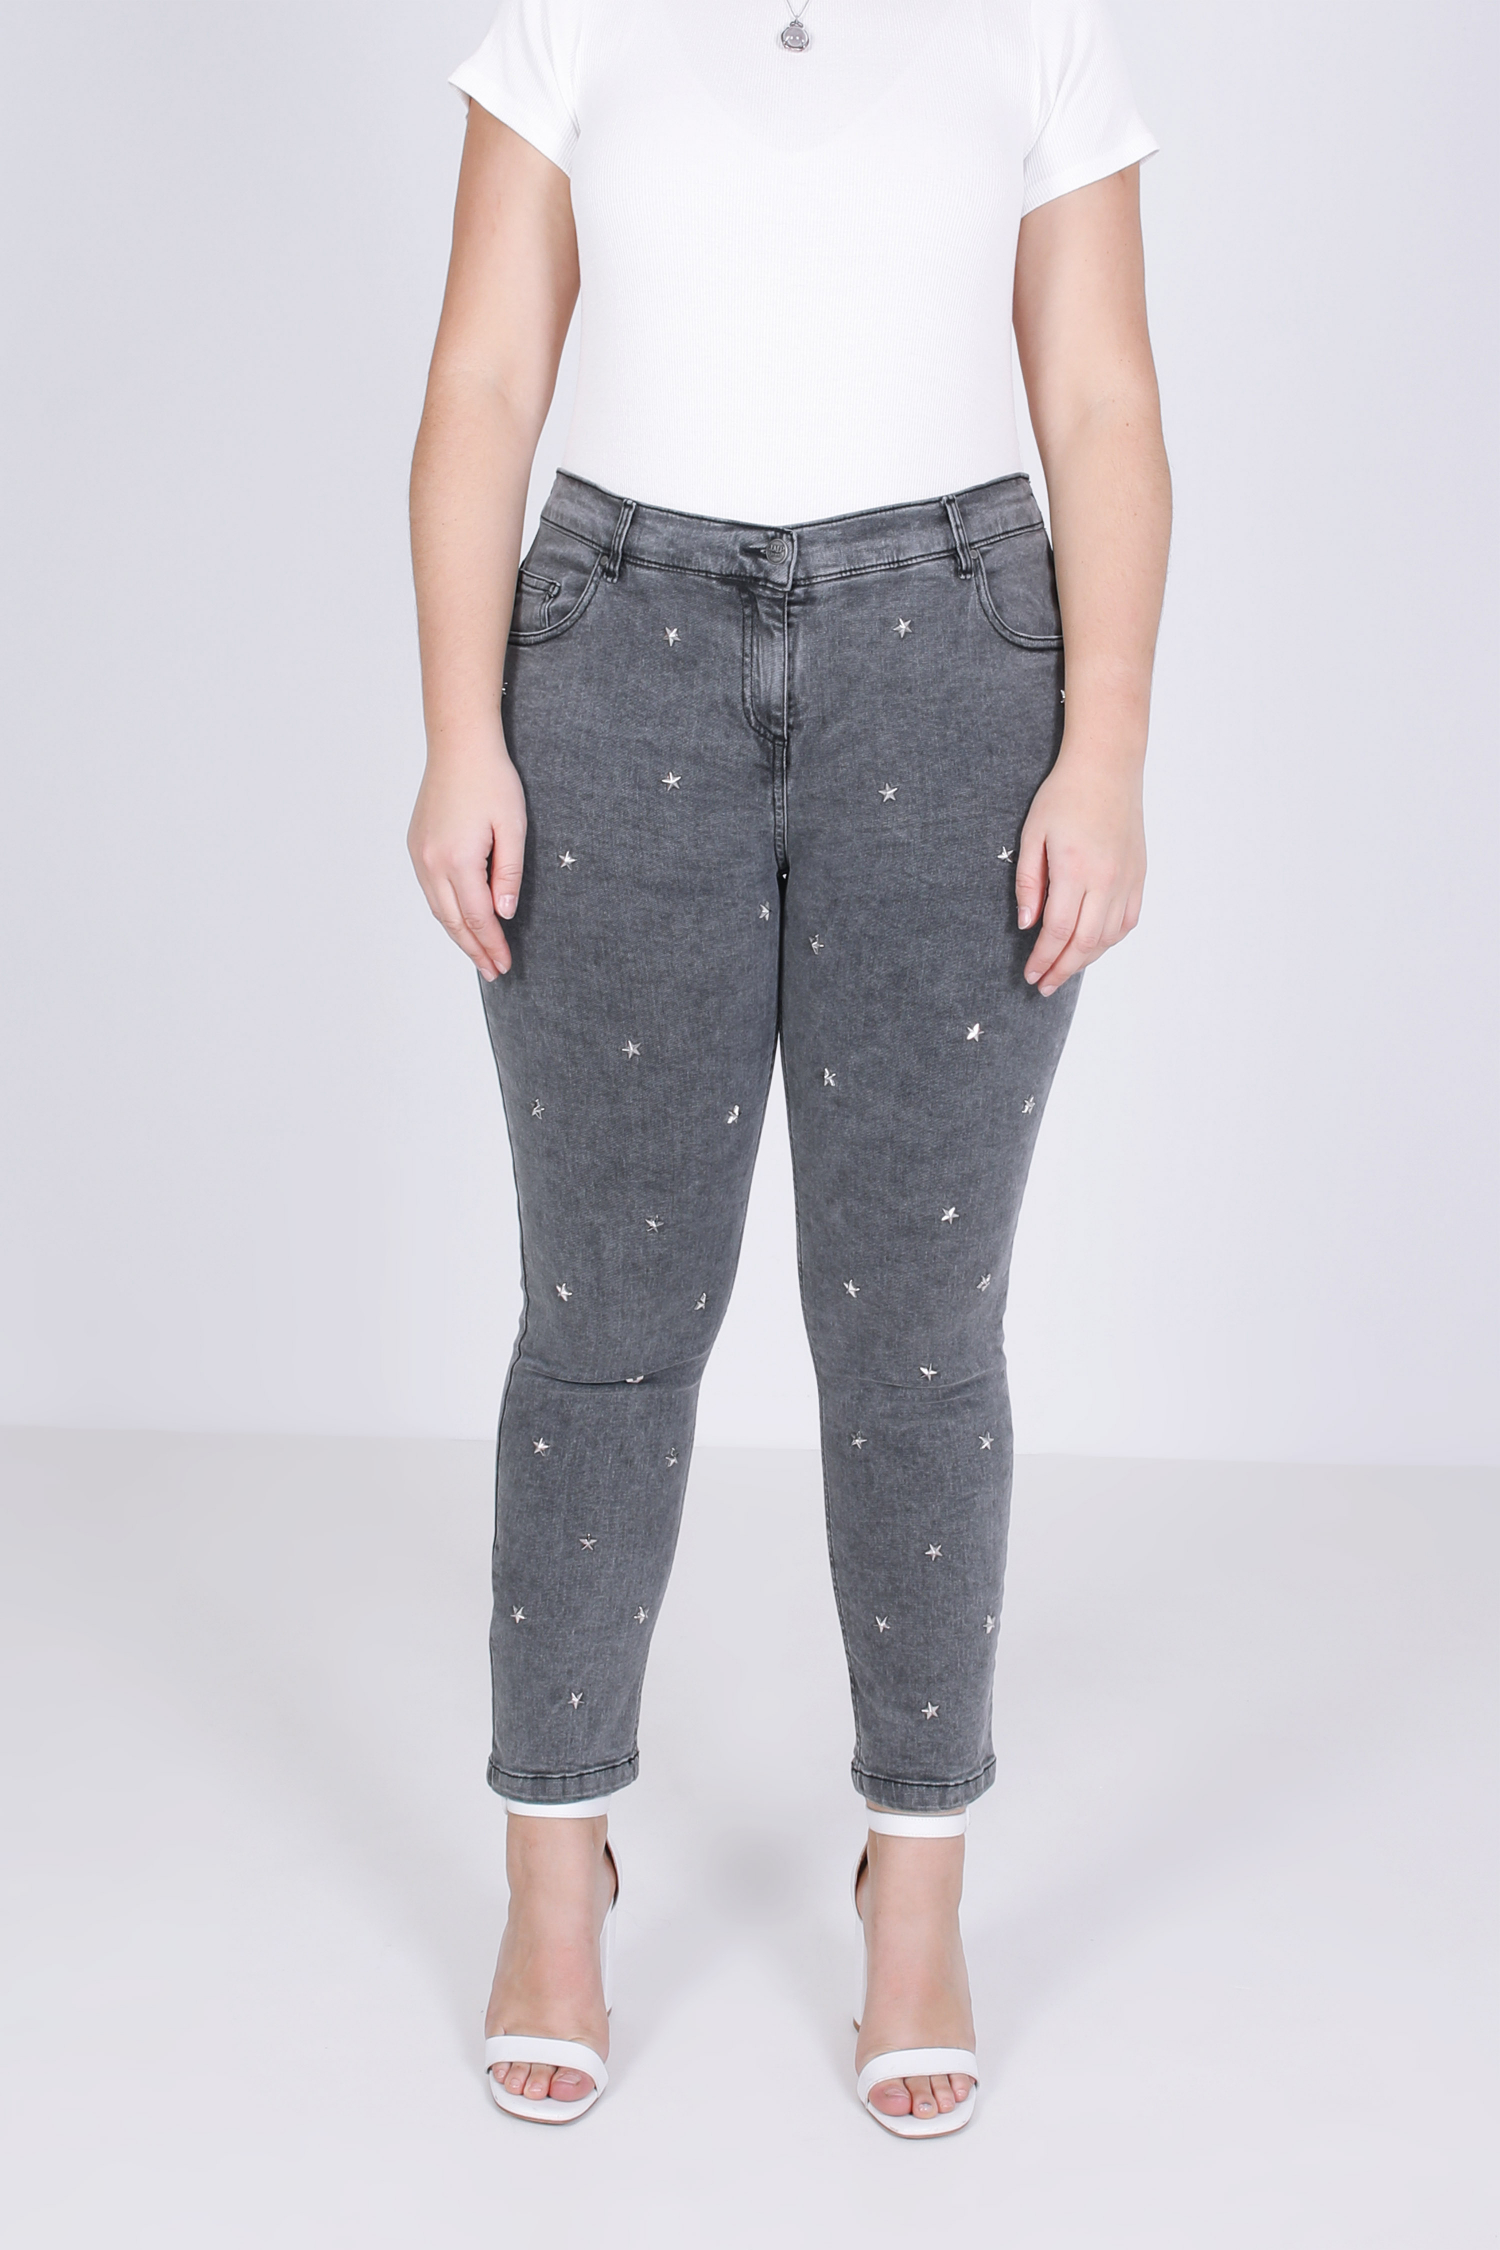 Gray jeans with studs on the front